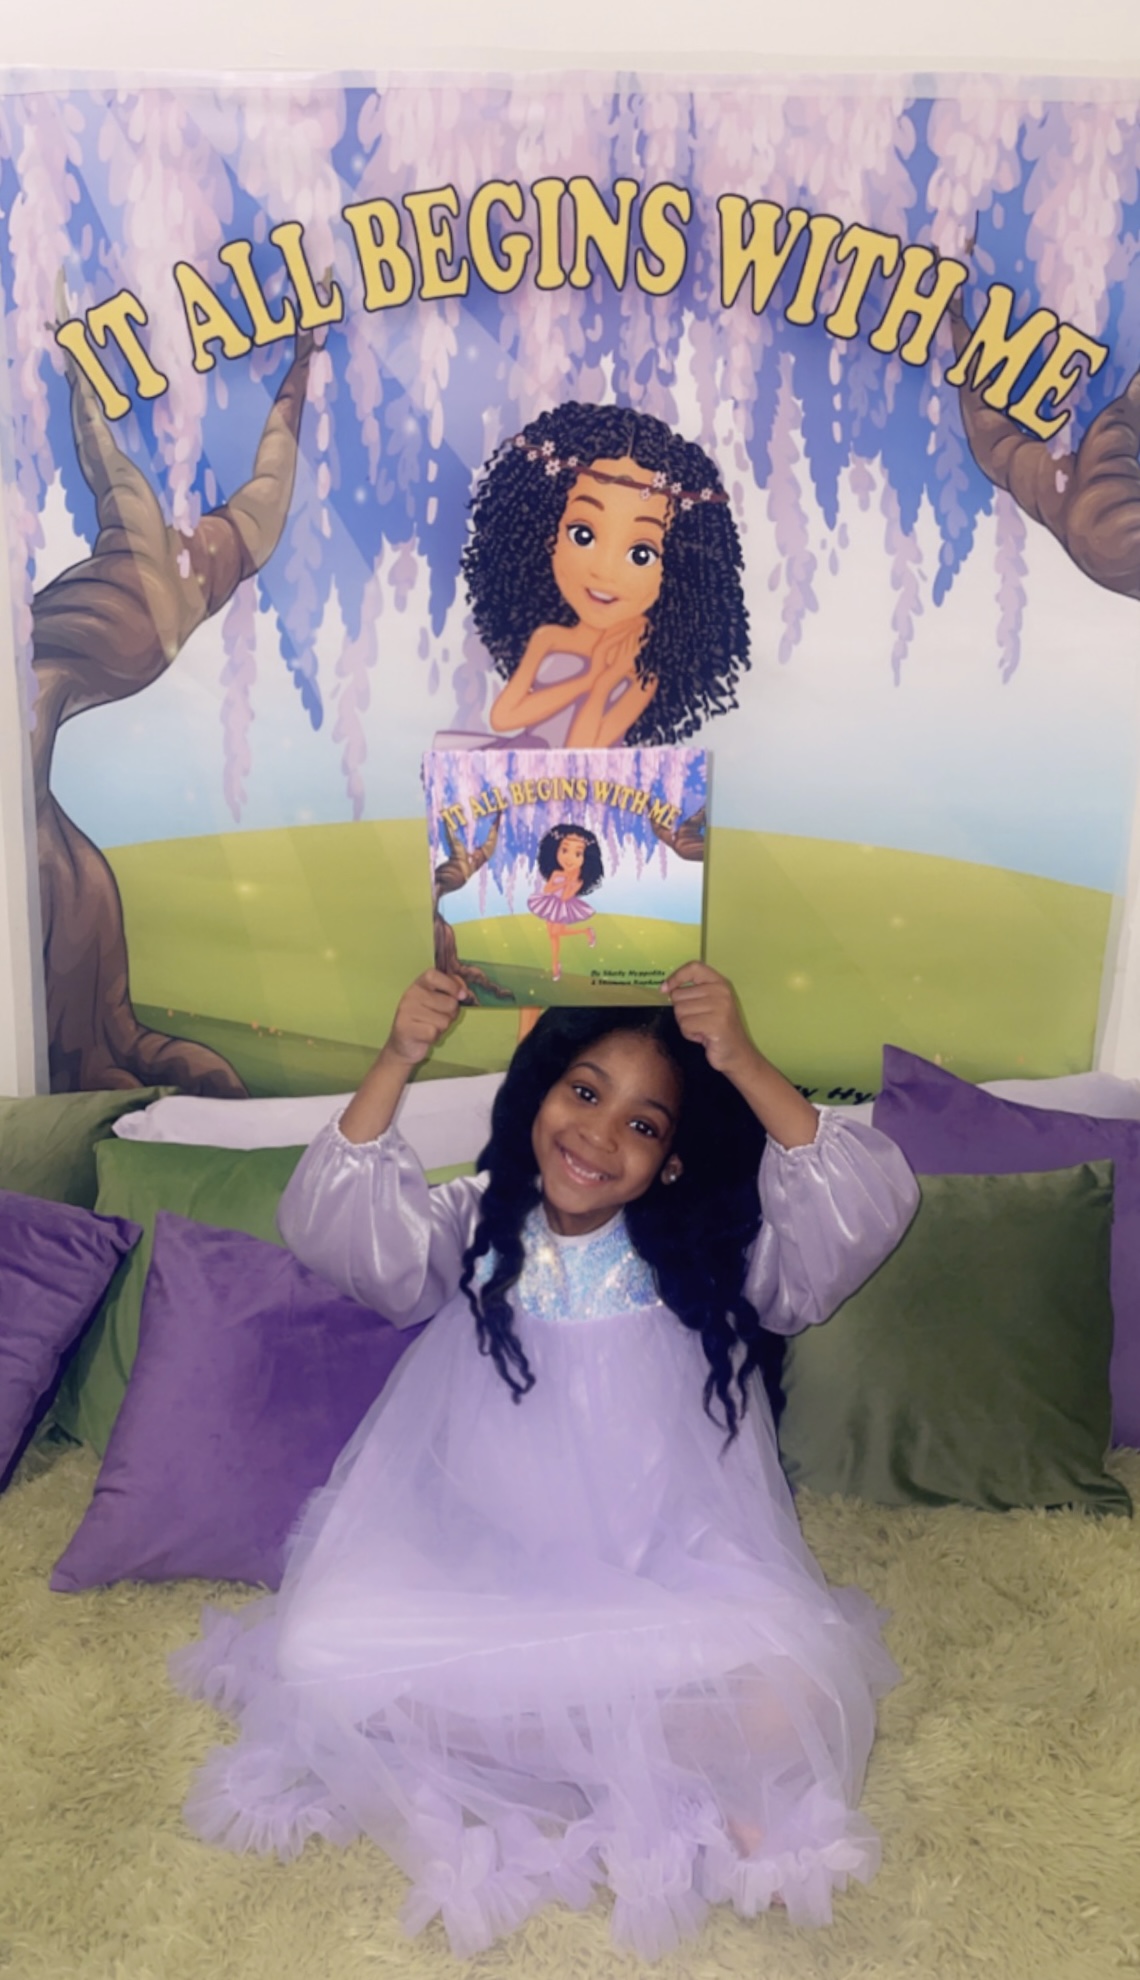 5-Year-Old Author Shamaya Raphael Pens Down "It All Begins With Me" A Book That Teaches Kids The Power of Self-Belief